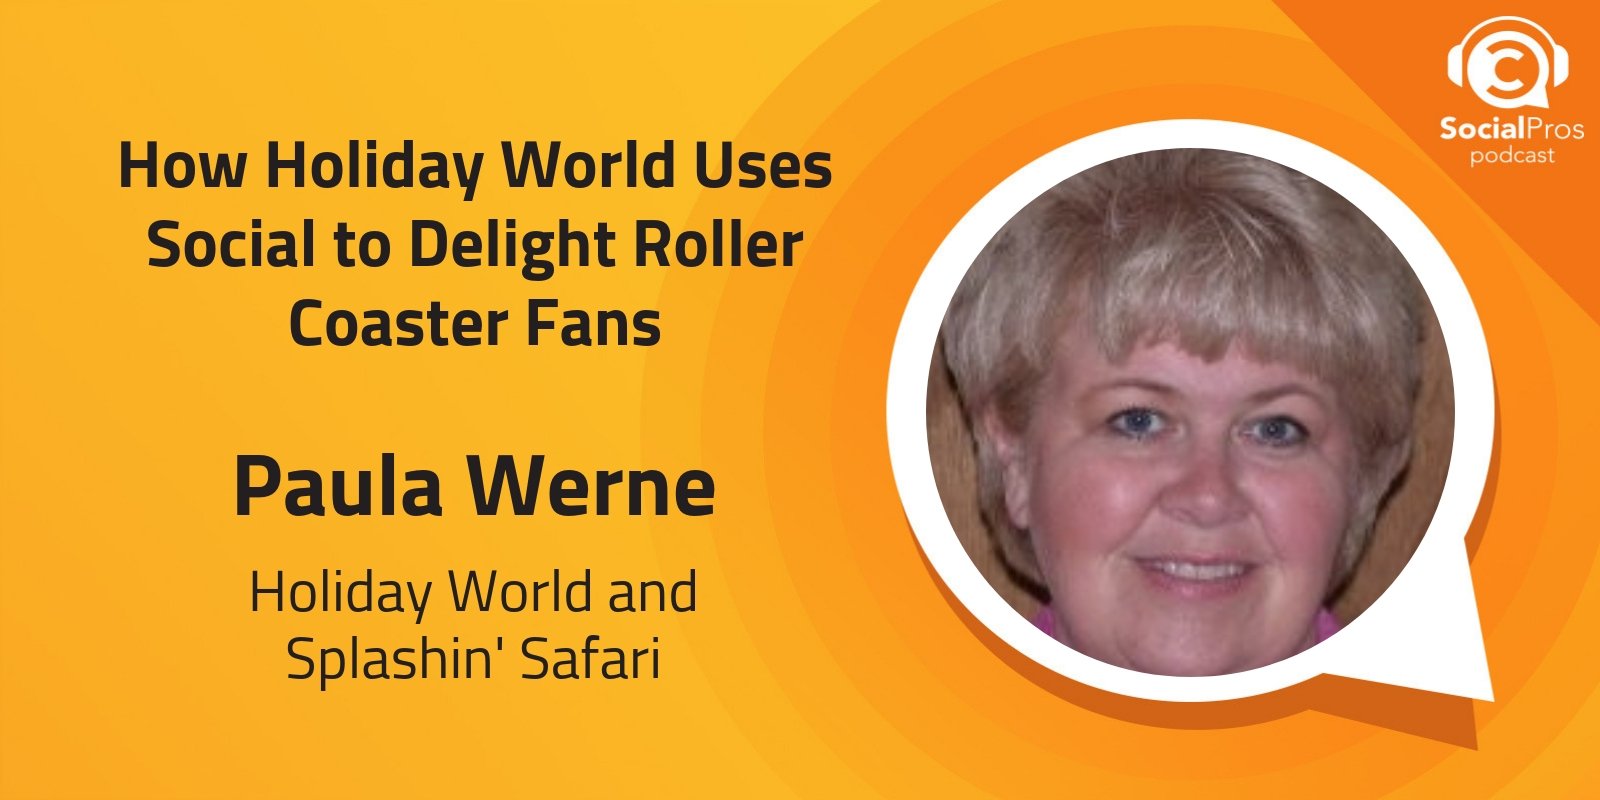 How Holiday World Uses Social to Delight Roller Coaster Fans